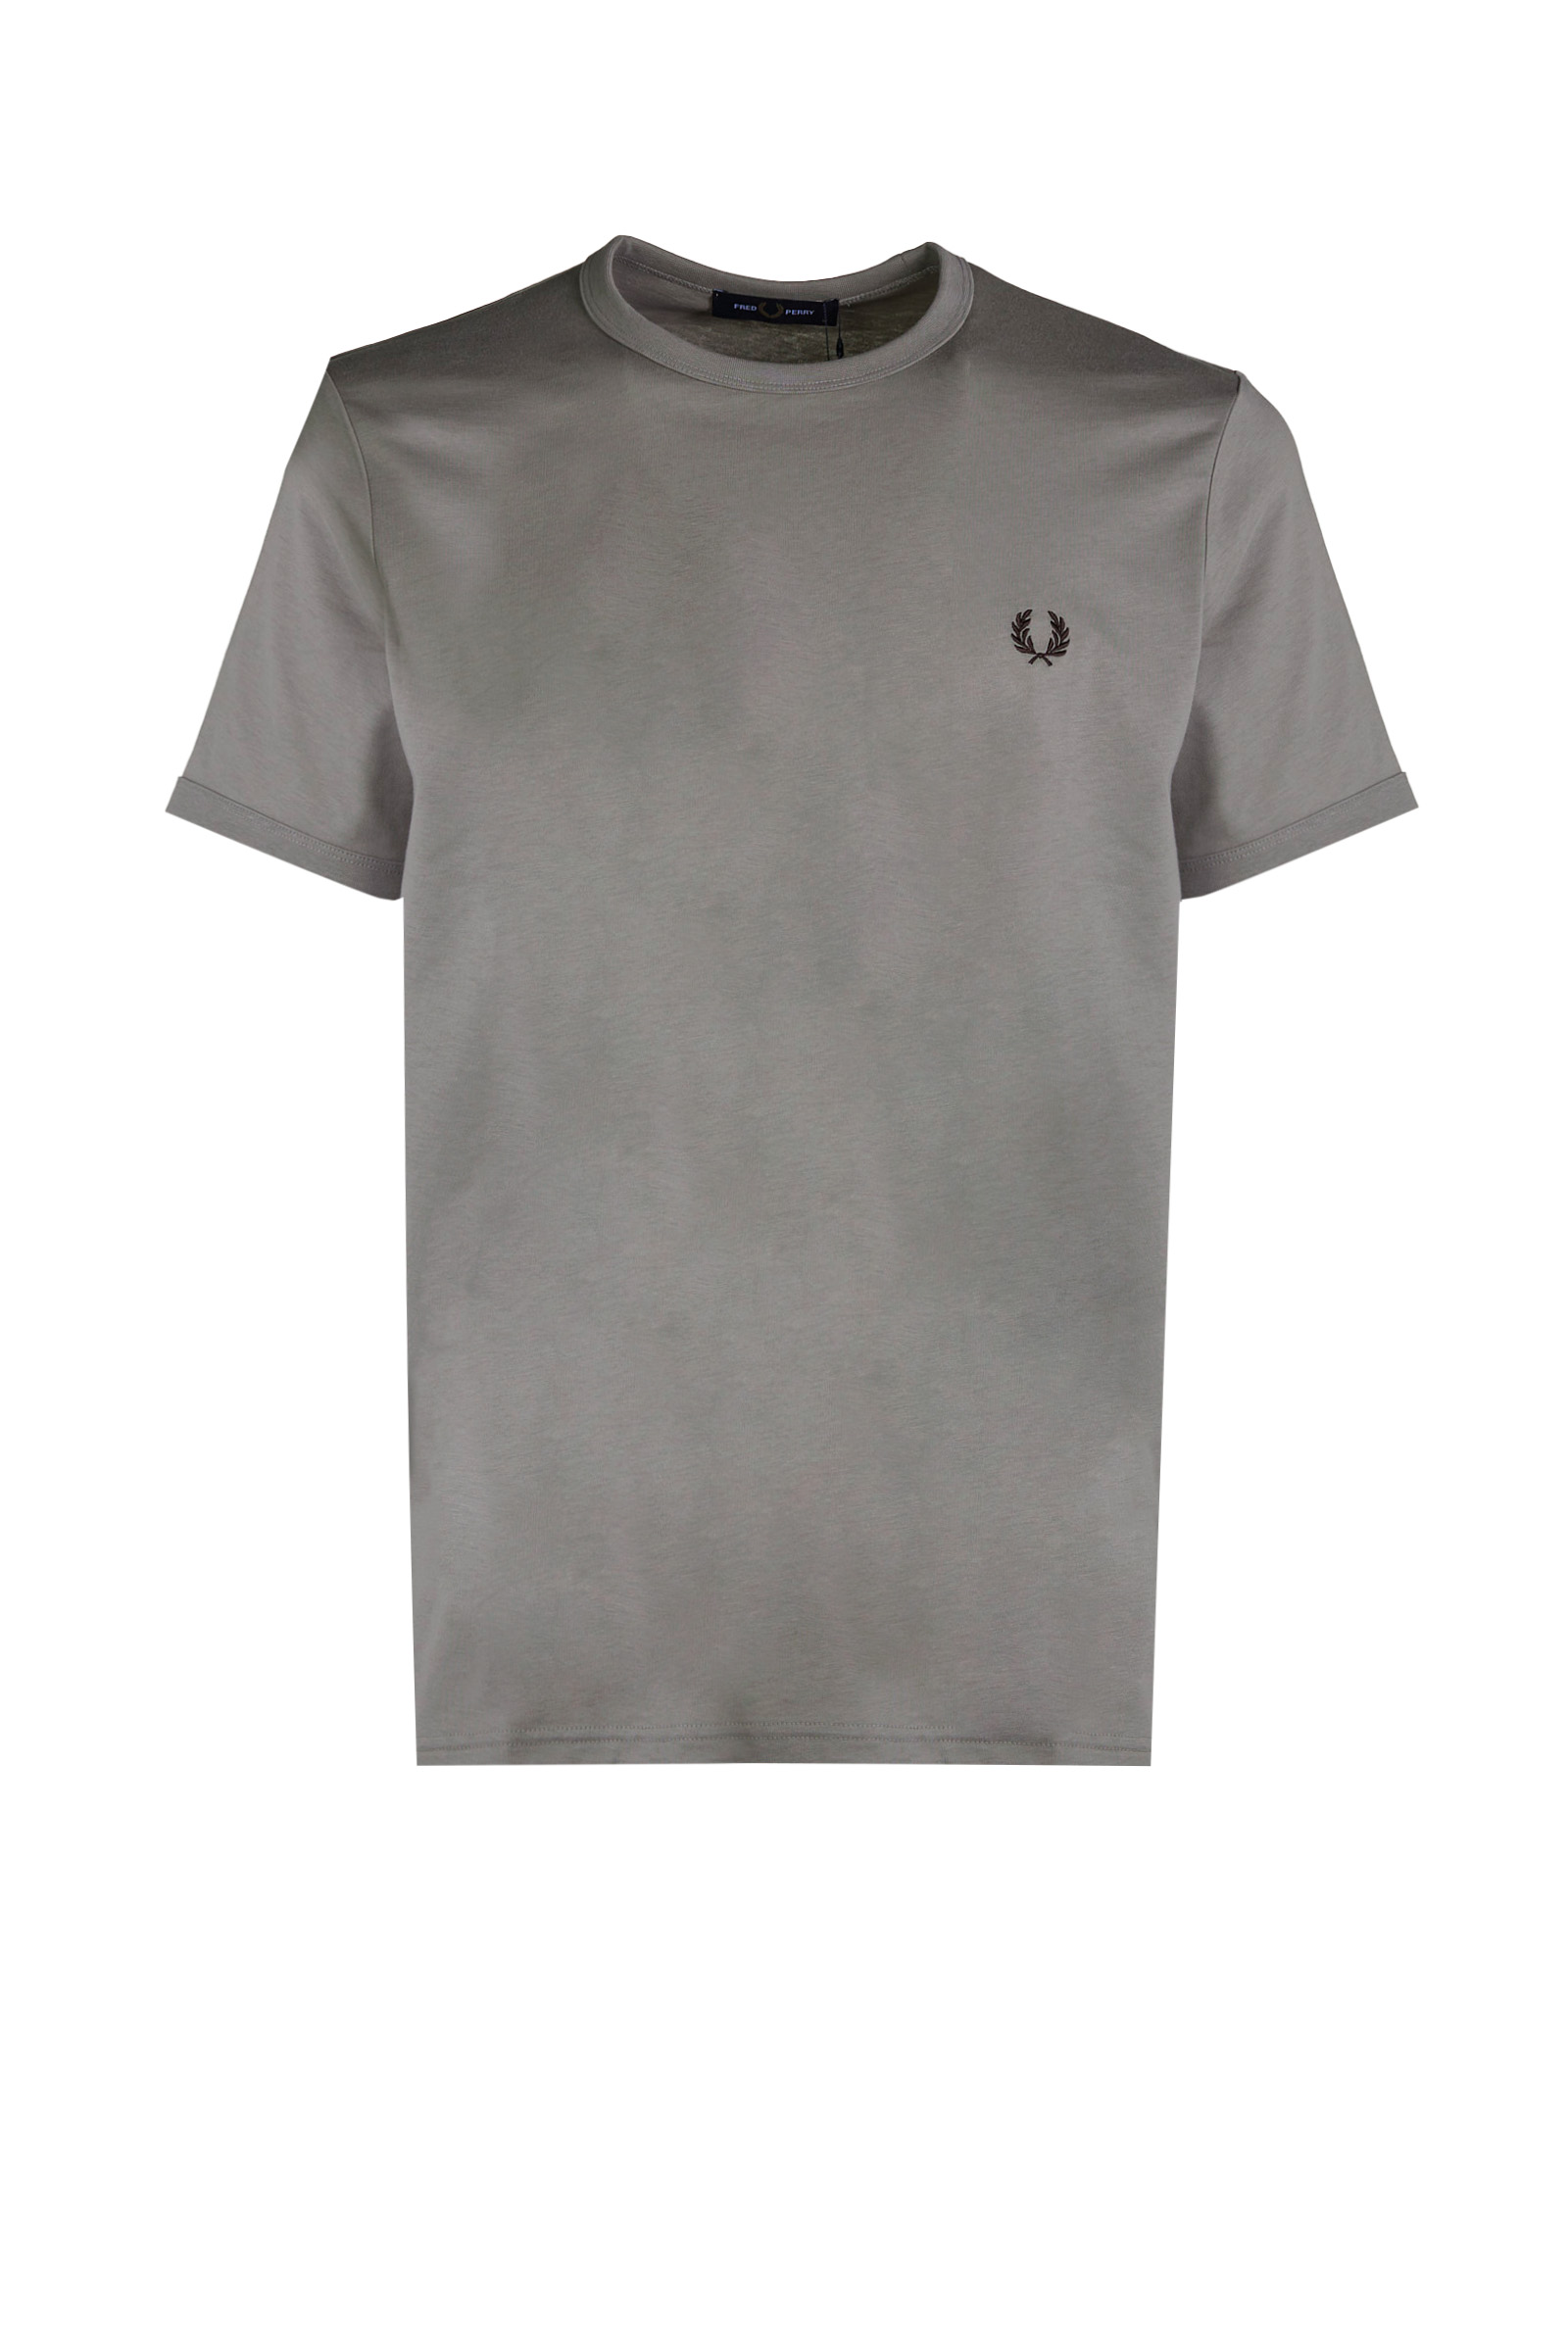 FRED PERRY T-SHIRT M3519 T-RINGER U84 ROPE UOMO